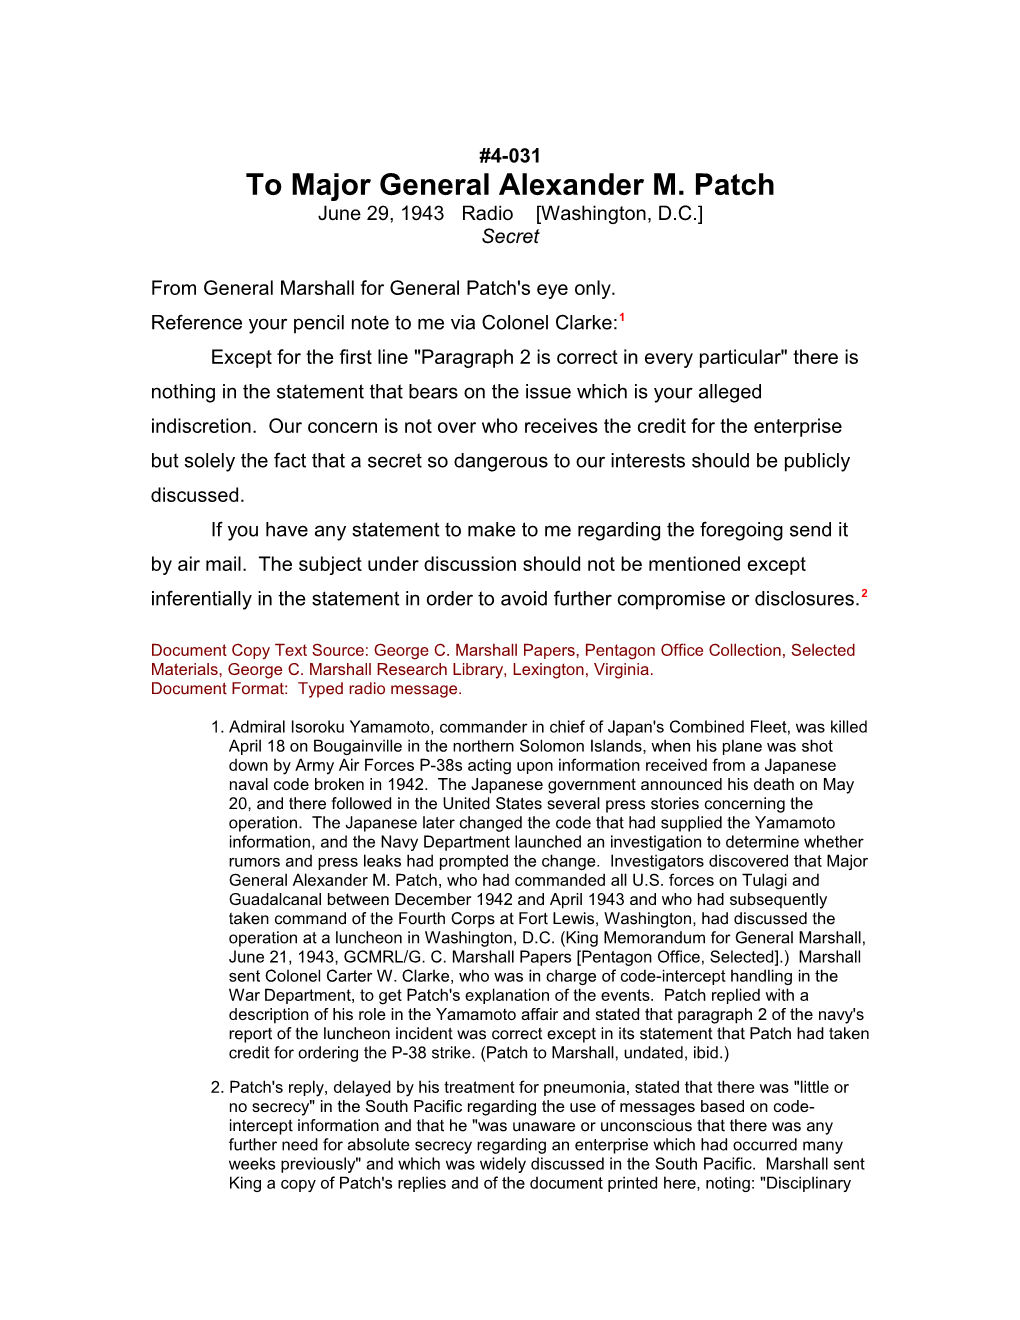 To Major General Alexander M. Patch